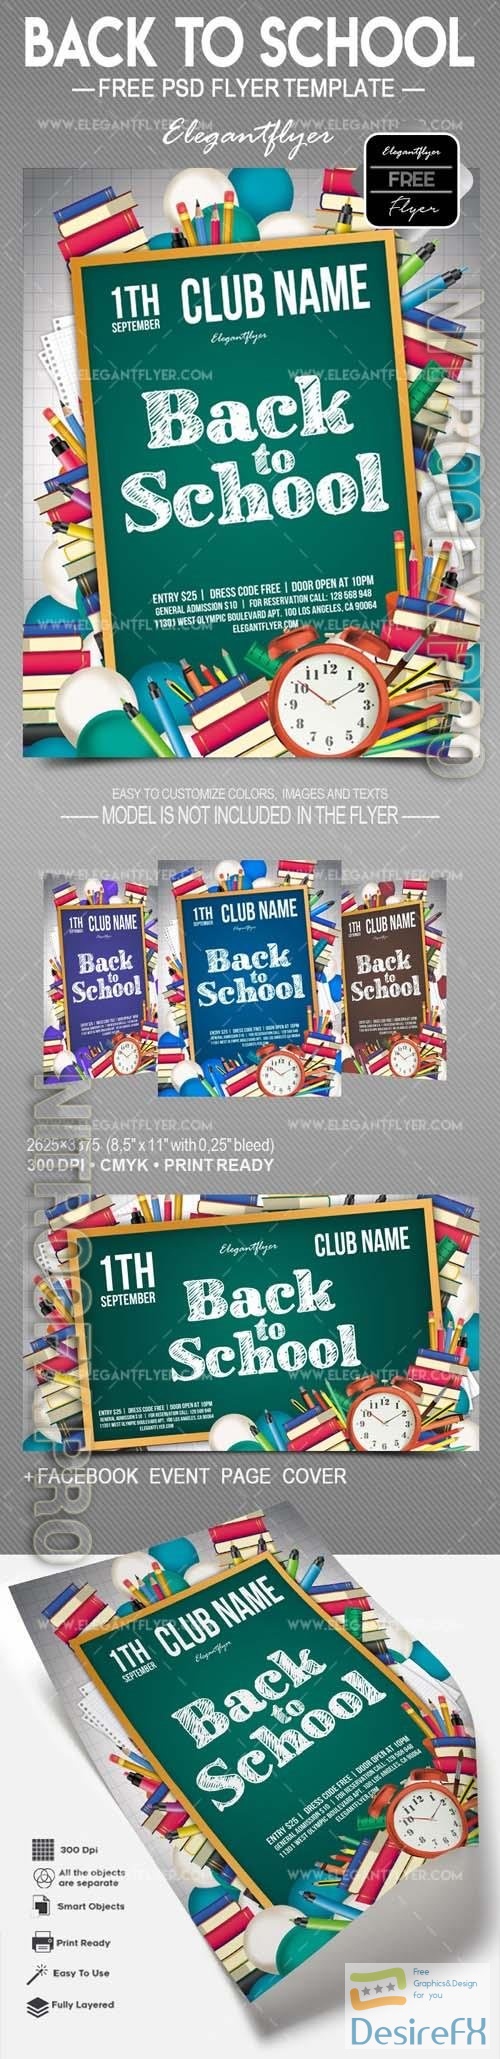 Back to School Flyer PSD Template vol 6